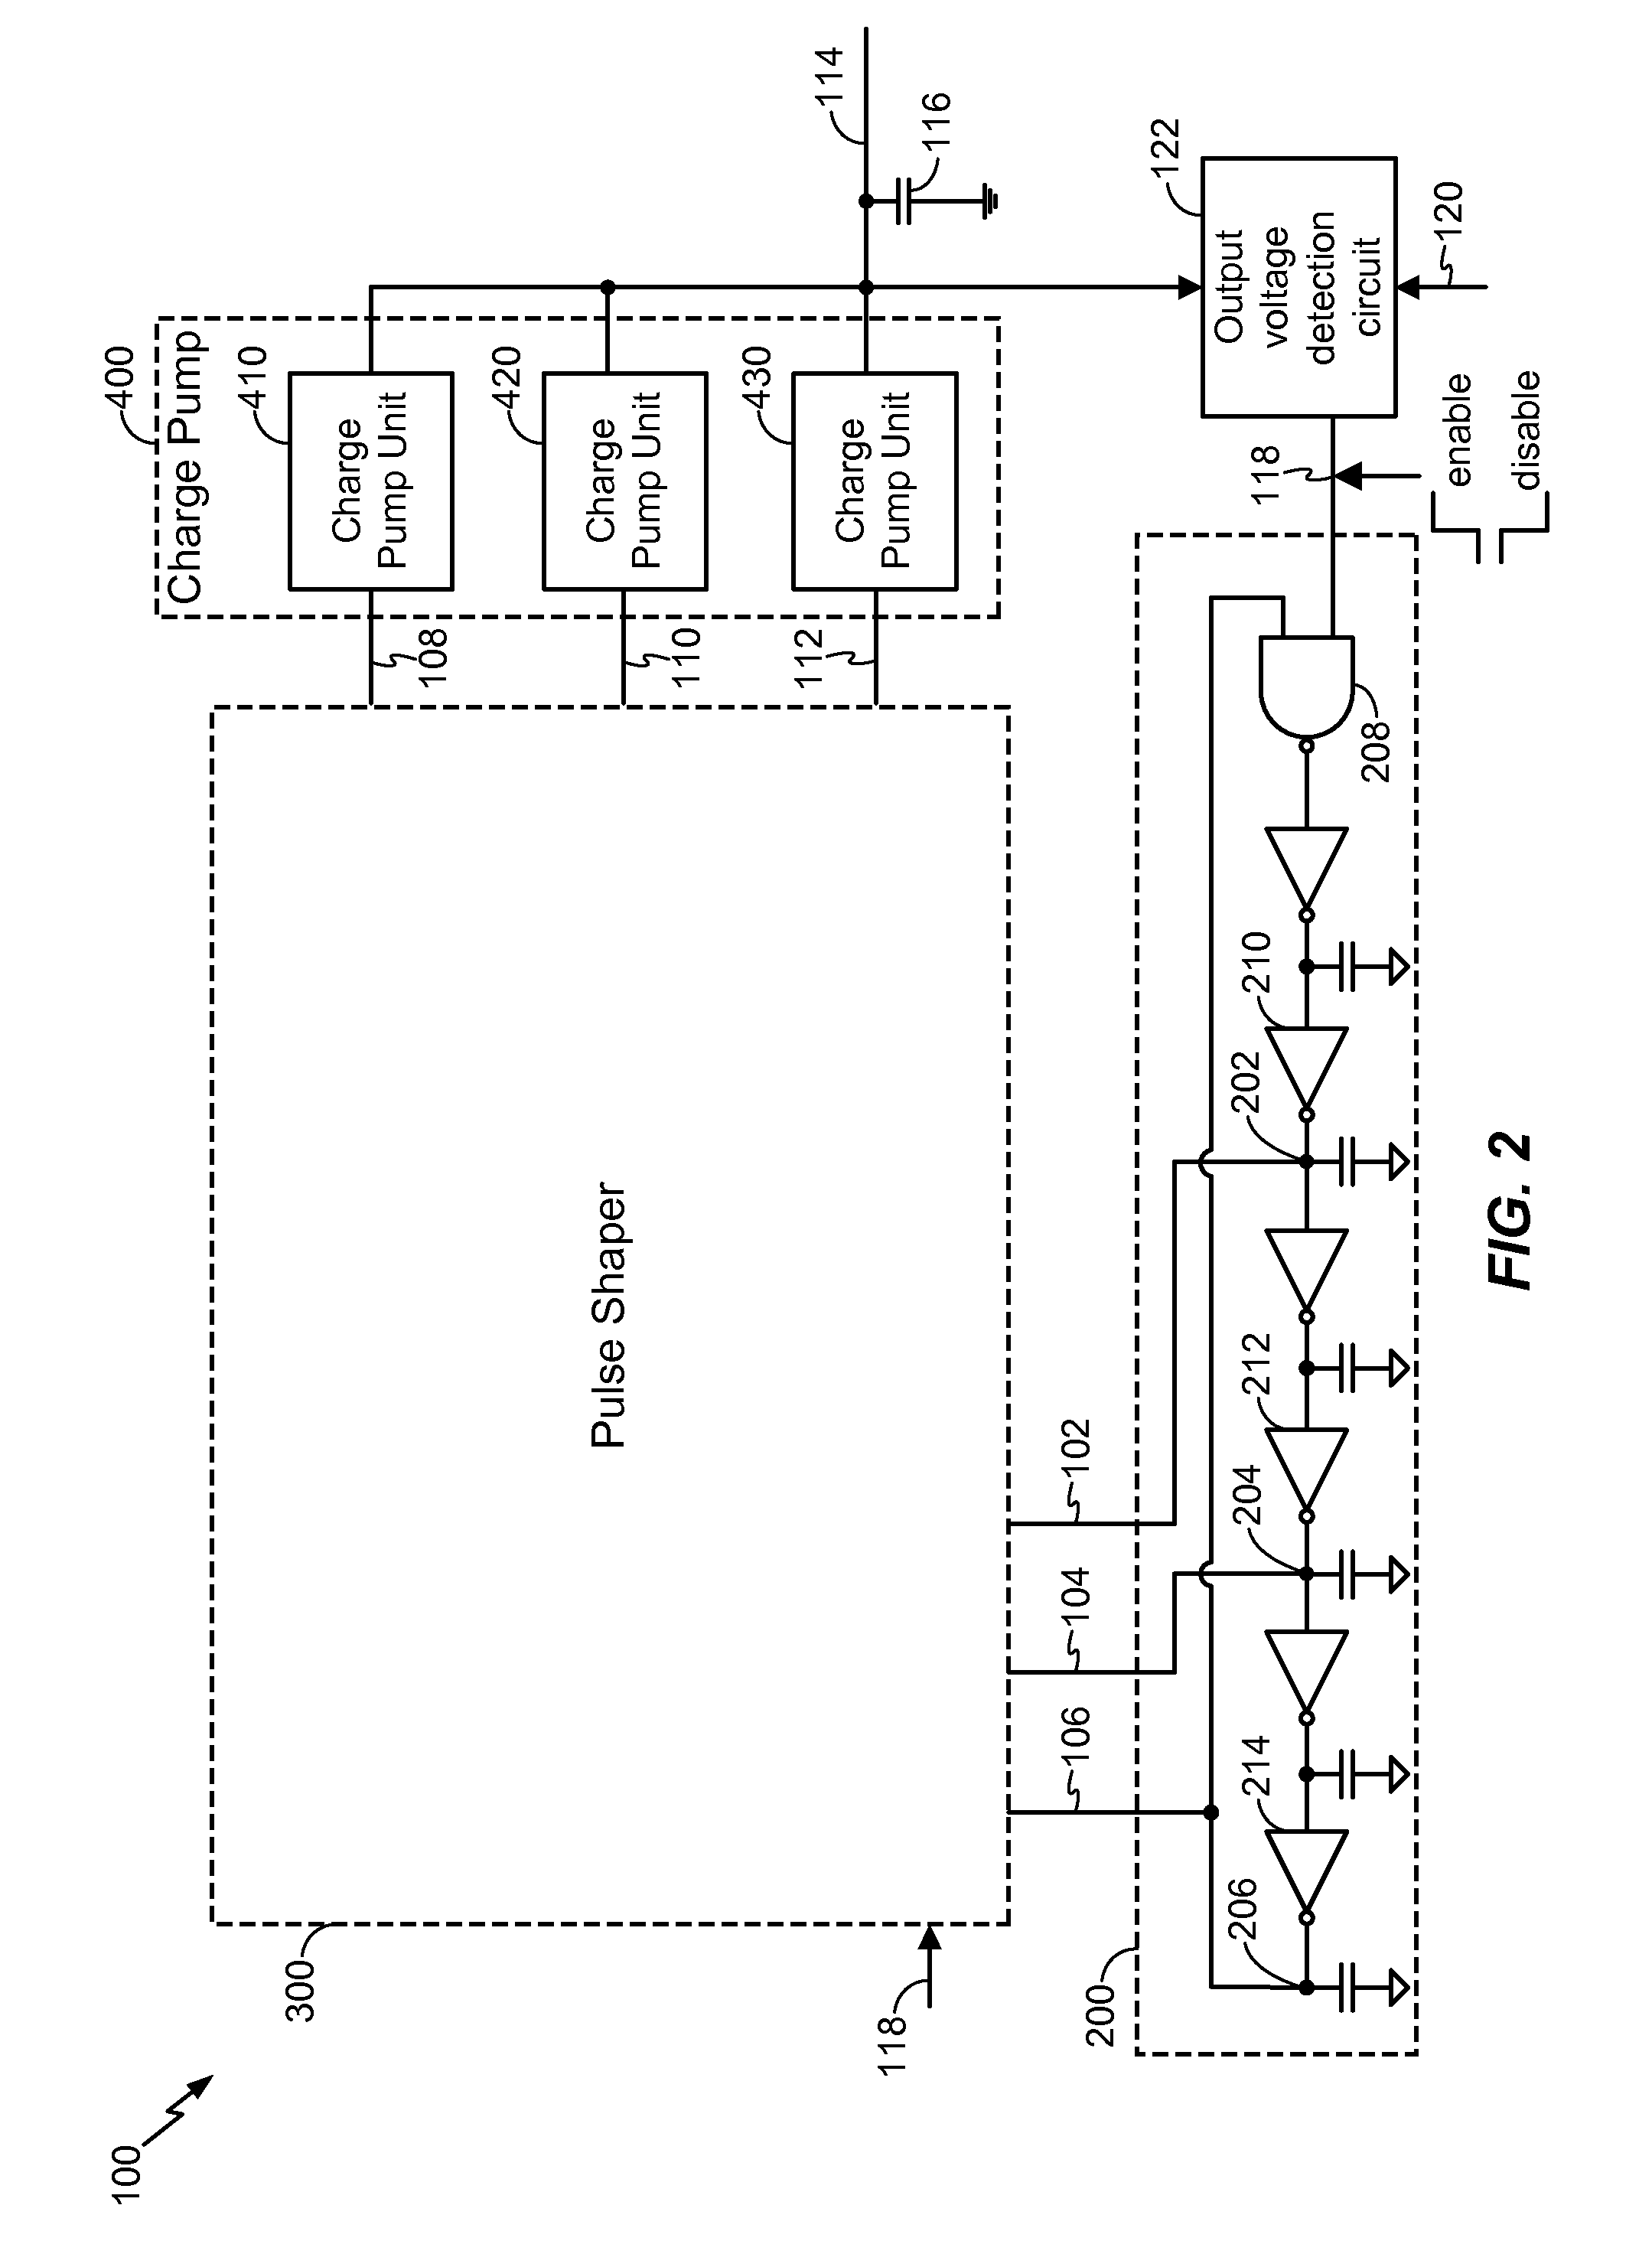 Method and apparatus to provide a clock signal to a charge pump